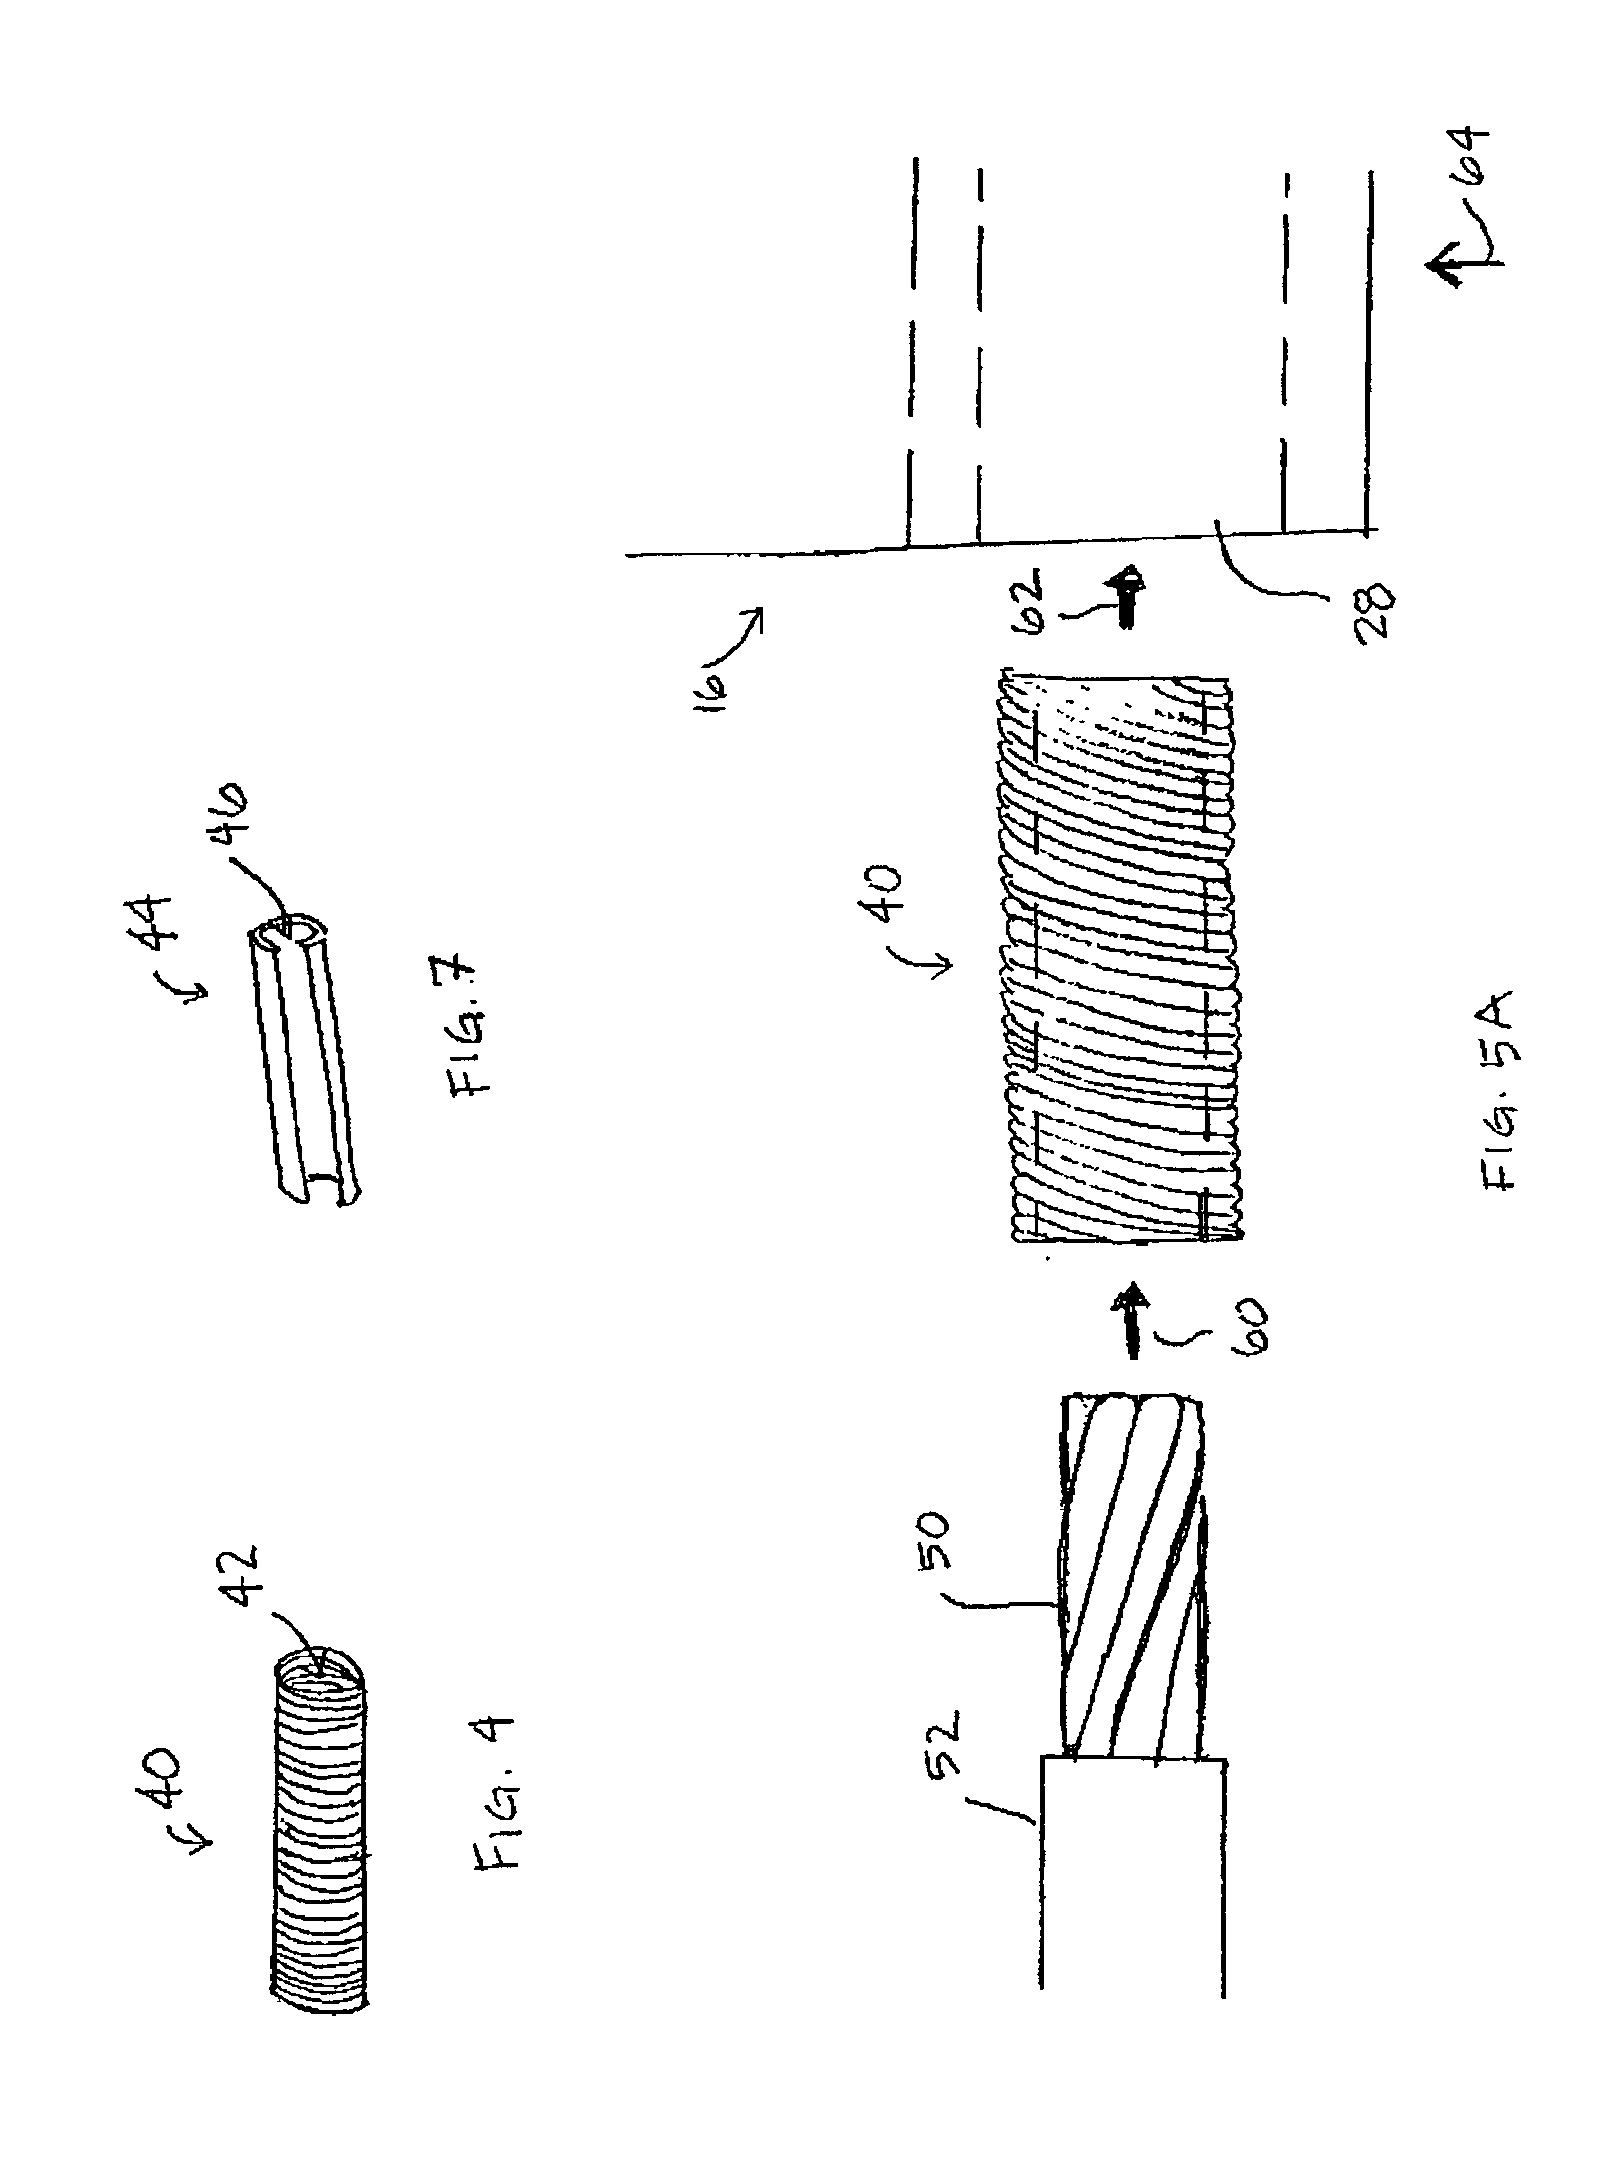 Methods and apparatus for joining small diameter conductors within medical electrical leads